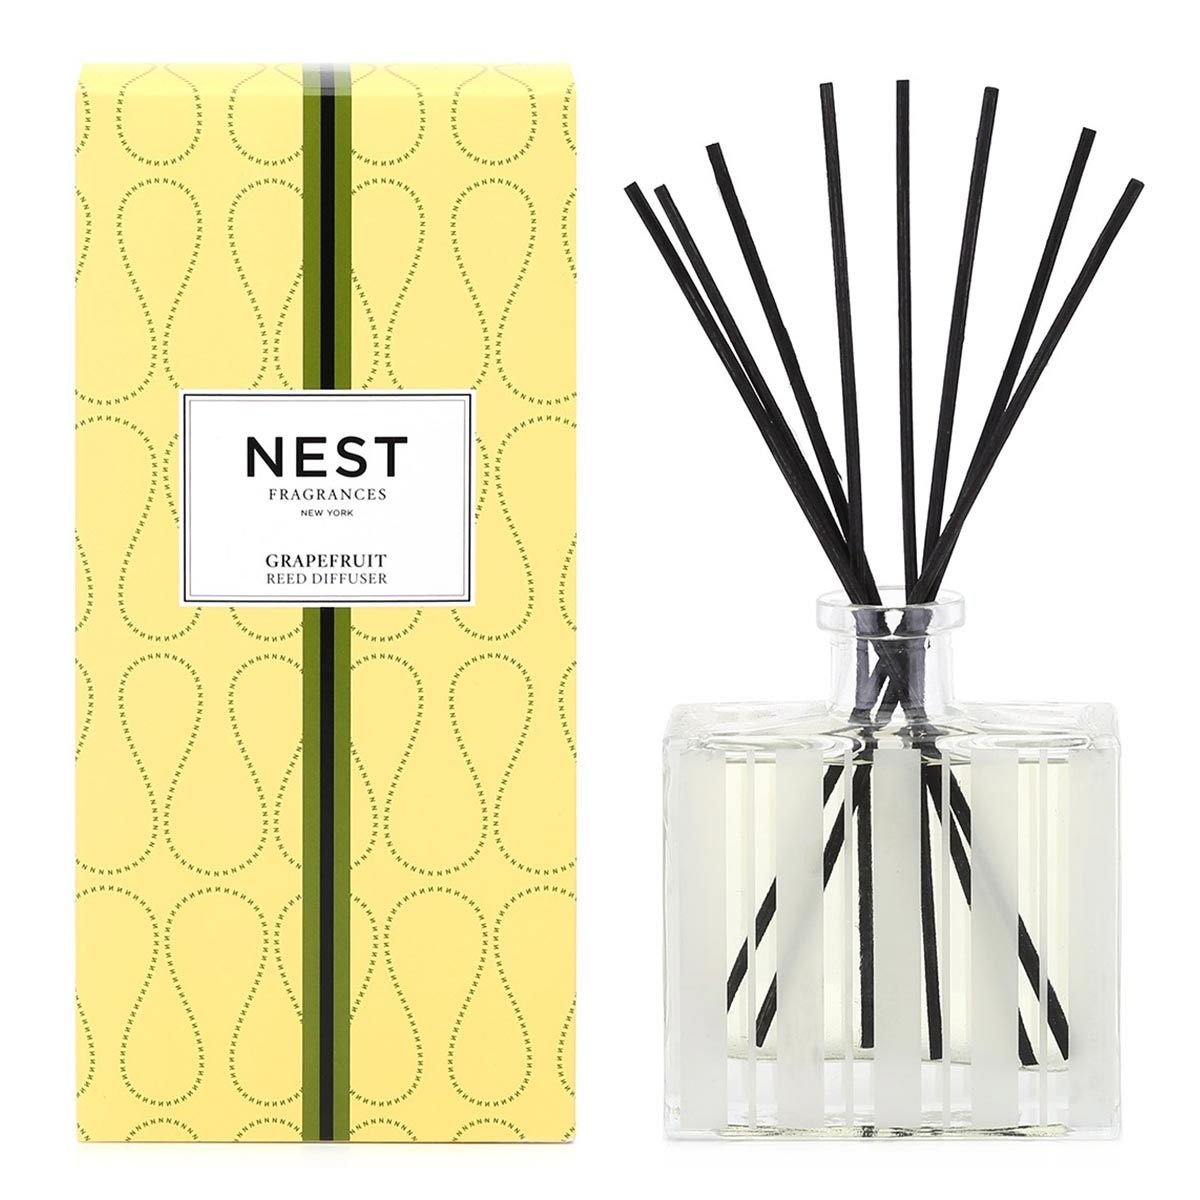 Primary image of Grapefruit Reed Diffuser